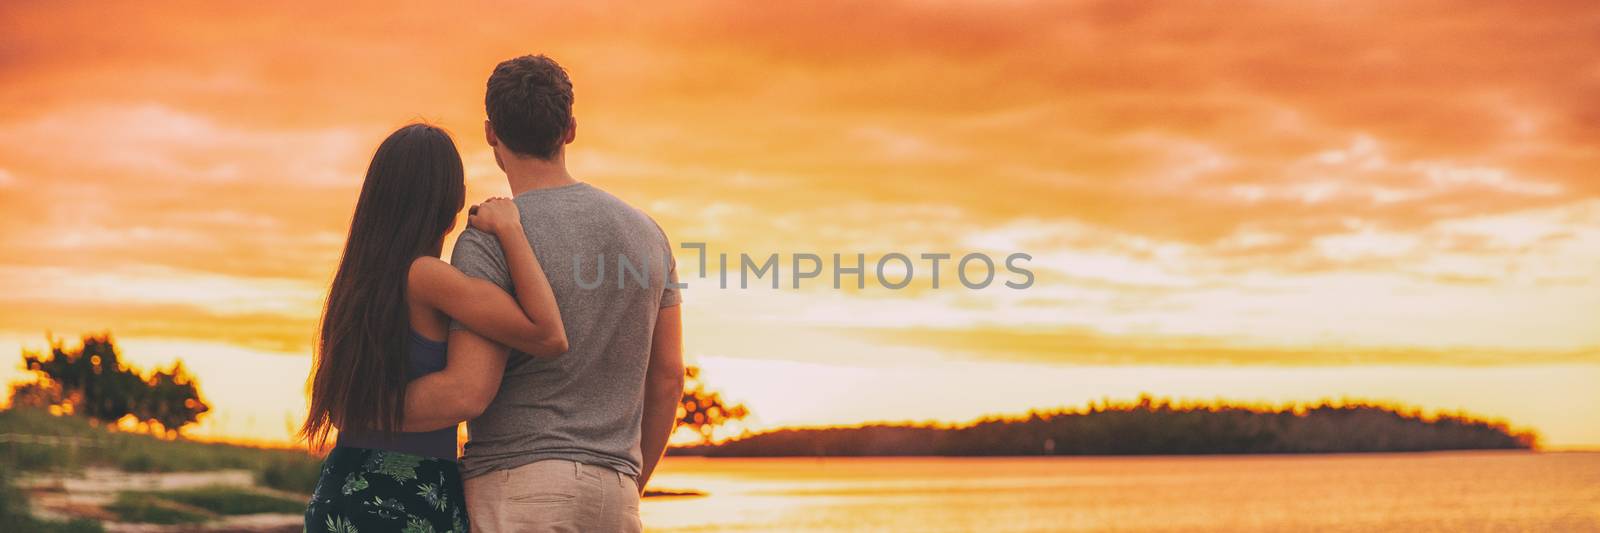 Couple watching sunset on summer adventure travel at beach panoramic banner - glow sky background at dusk.